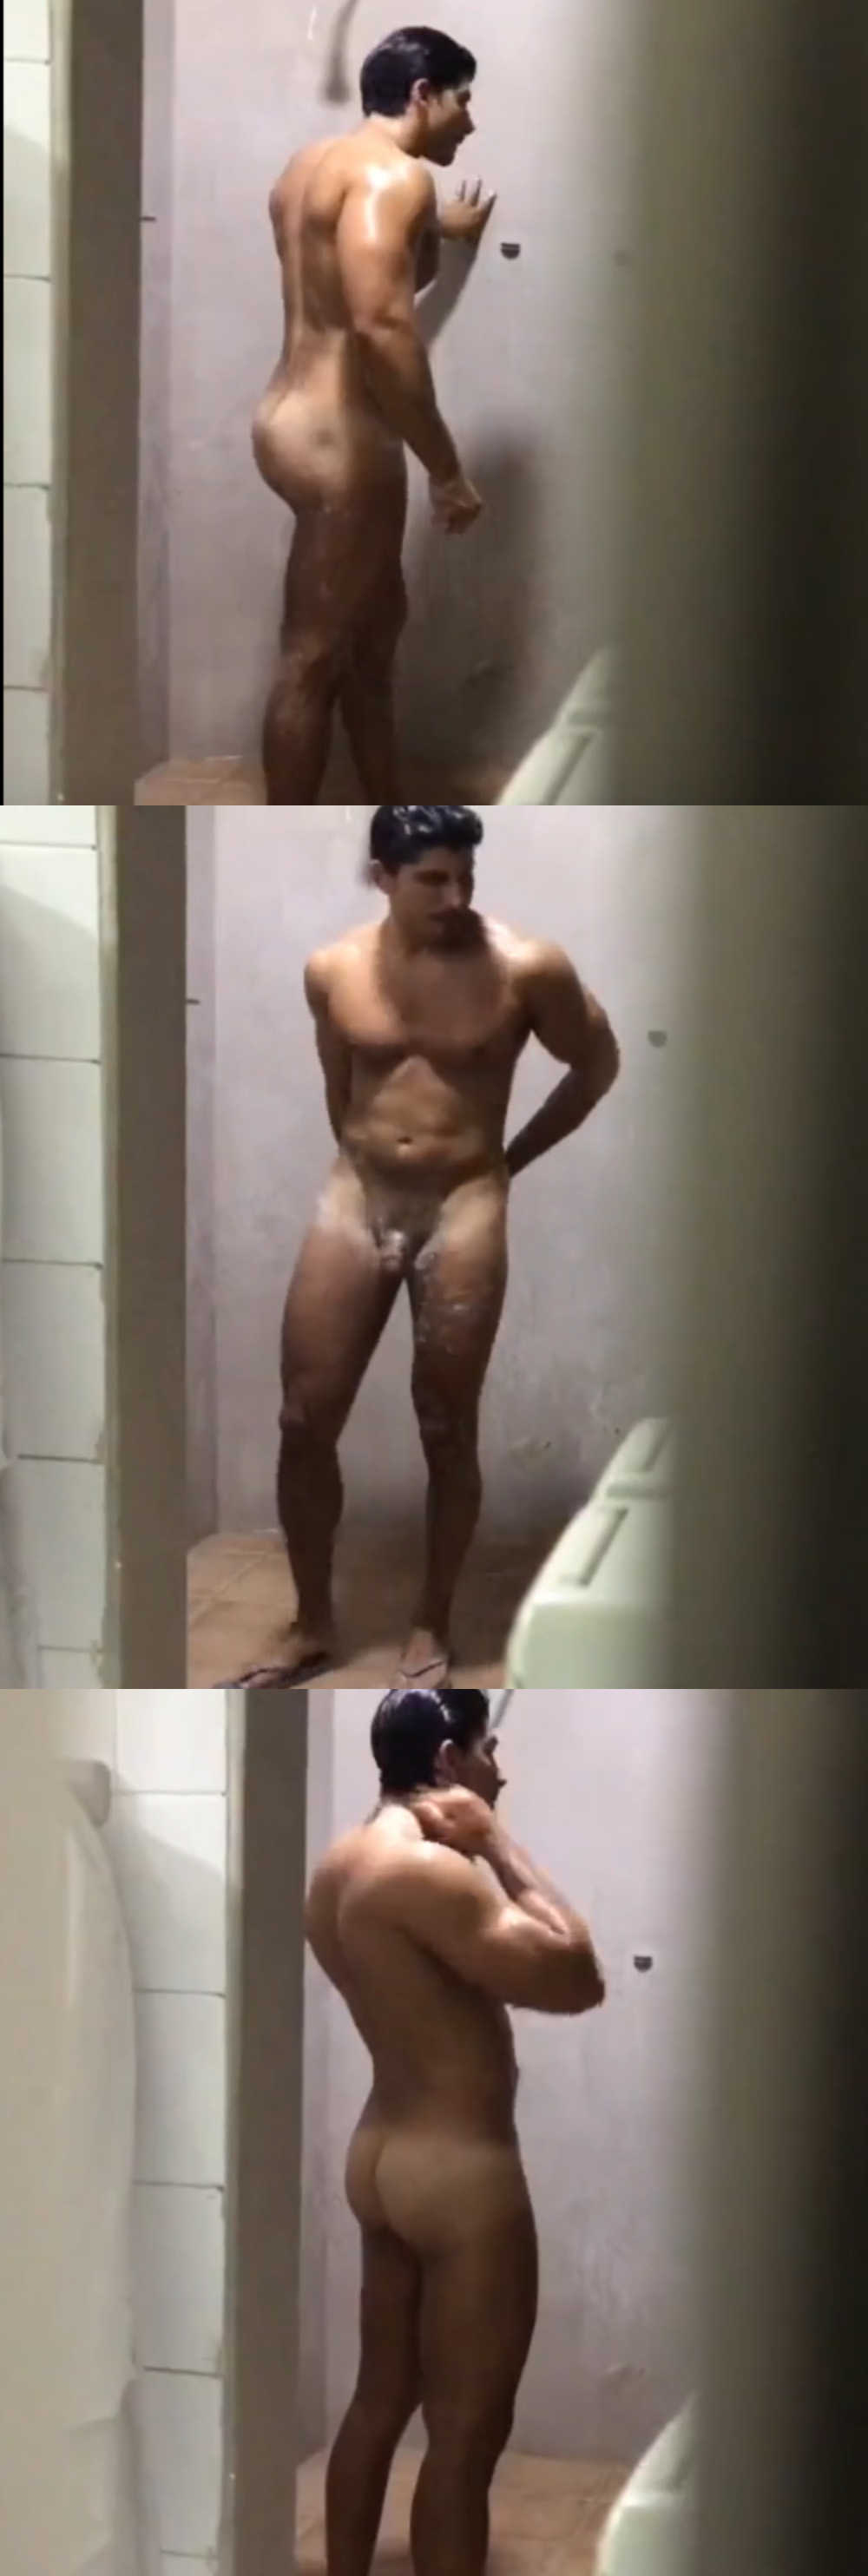 big muscle stud caught naked in shower